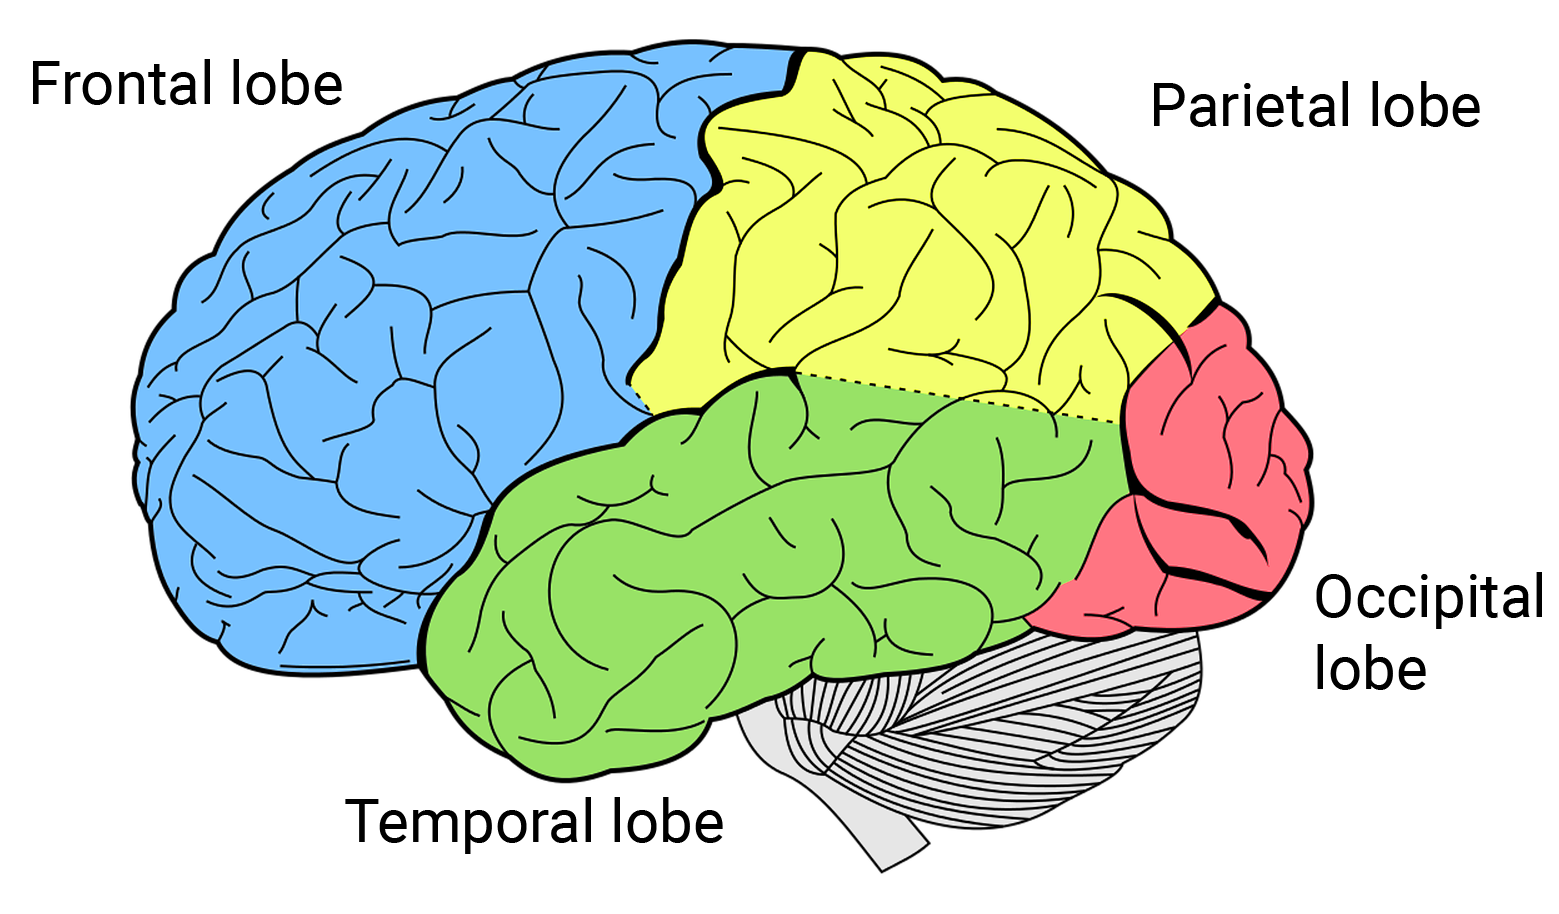 Parietal Lobe - Function, Location, Structure and Related ...